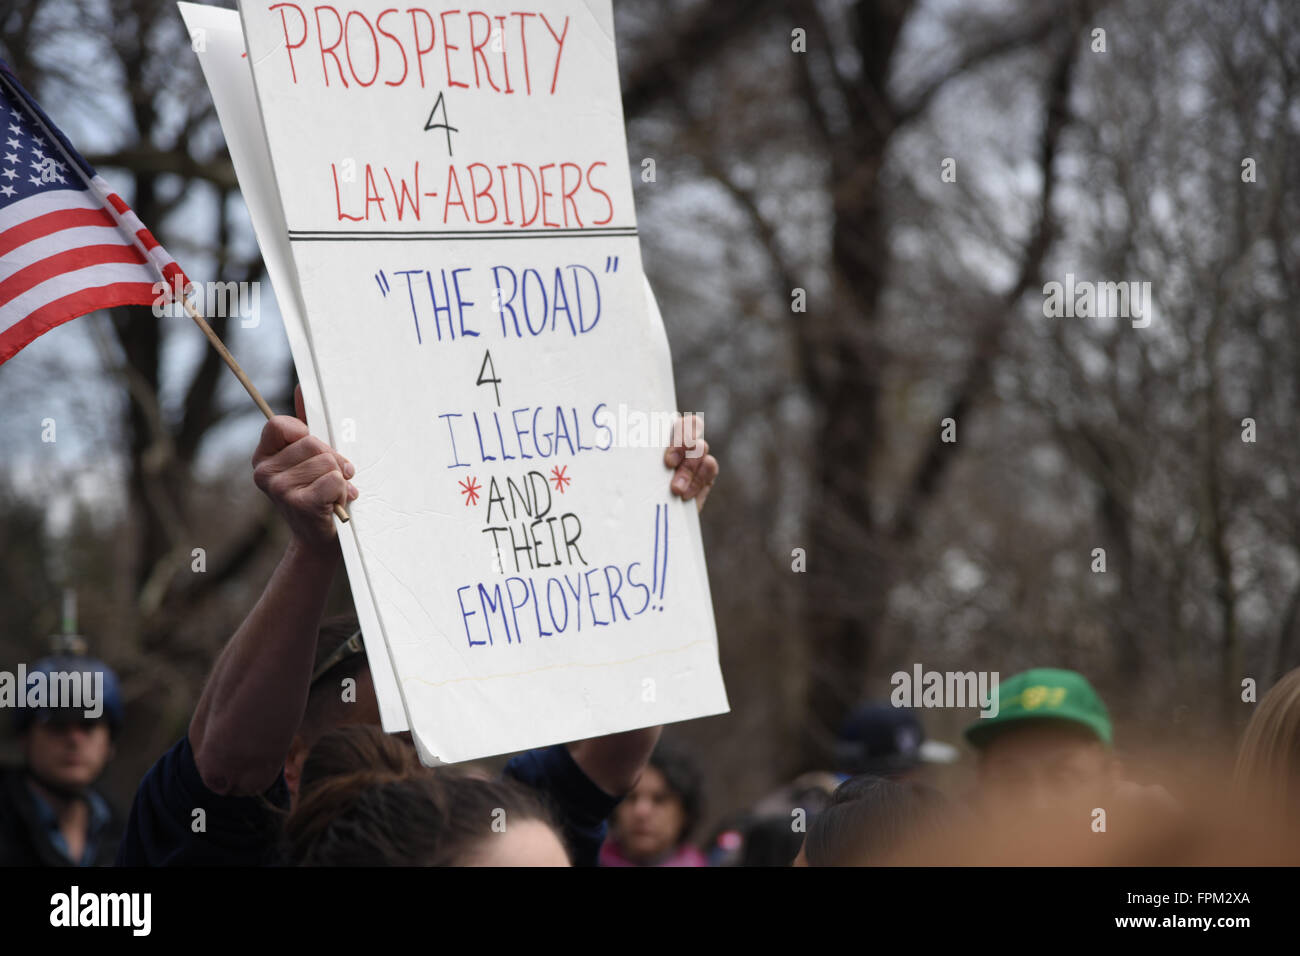 New York, USA, 19 March 2016: pro-Trump activists on hand during NYC rally against Republican front runner Donald Trump Credit:  Andrew Katz/Alamy Live News Stock Photo